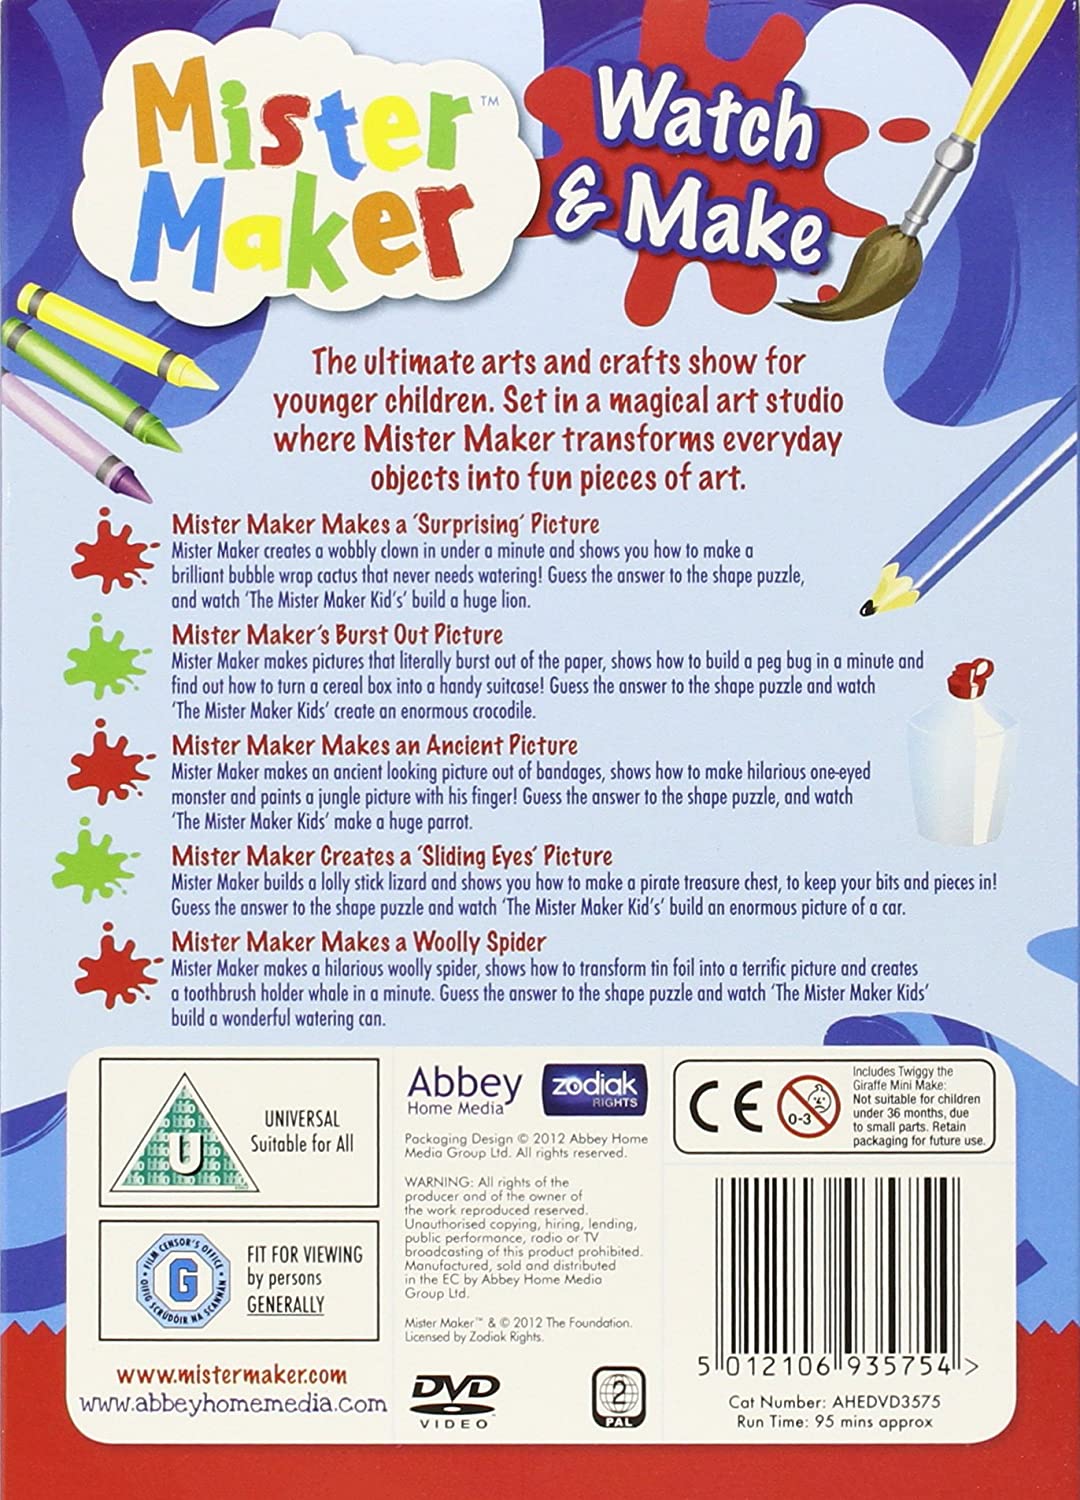 Mister Maker - Watch & Make 4 with FREE Mini Make Gift - Children's television series [DVD]